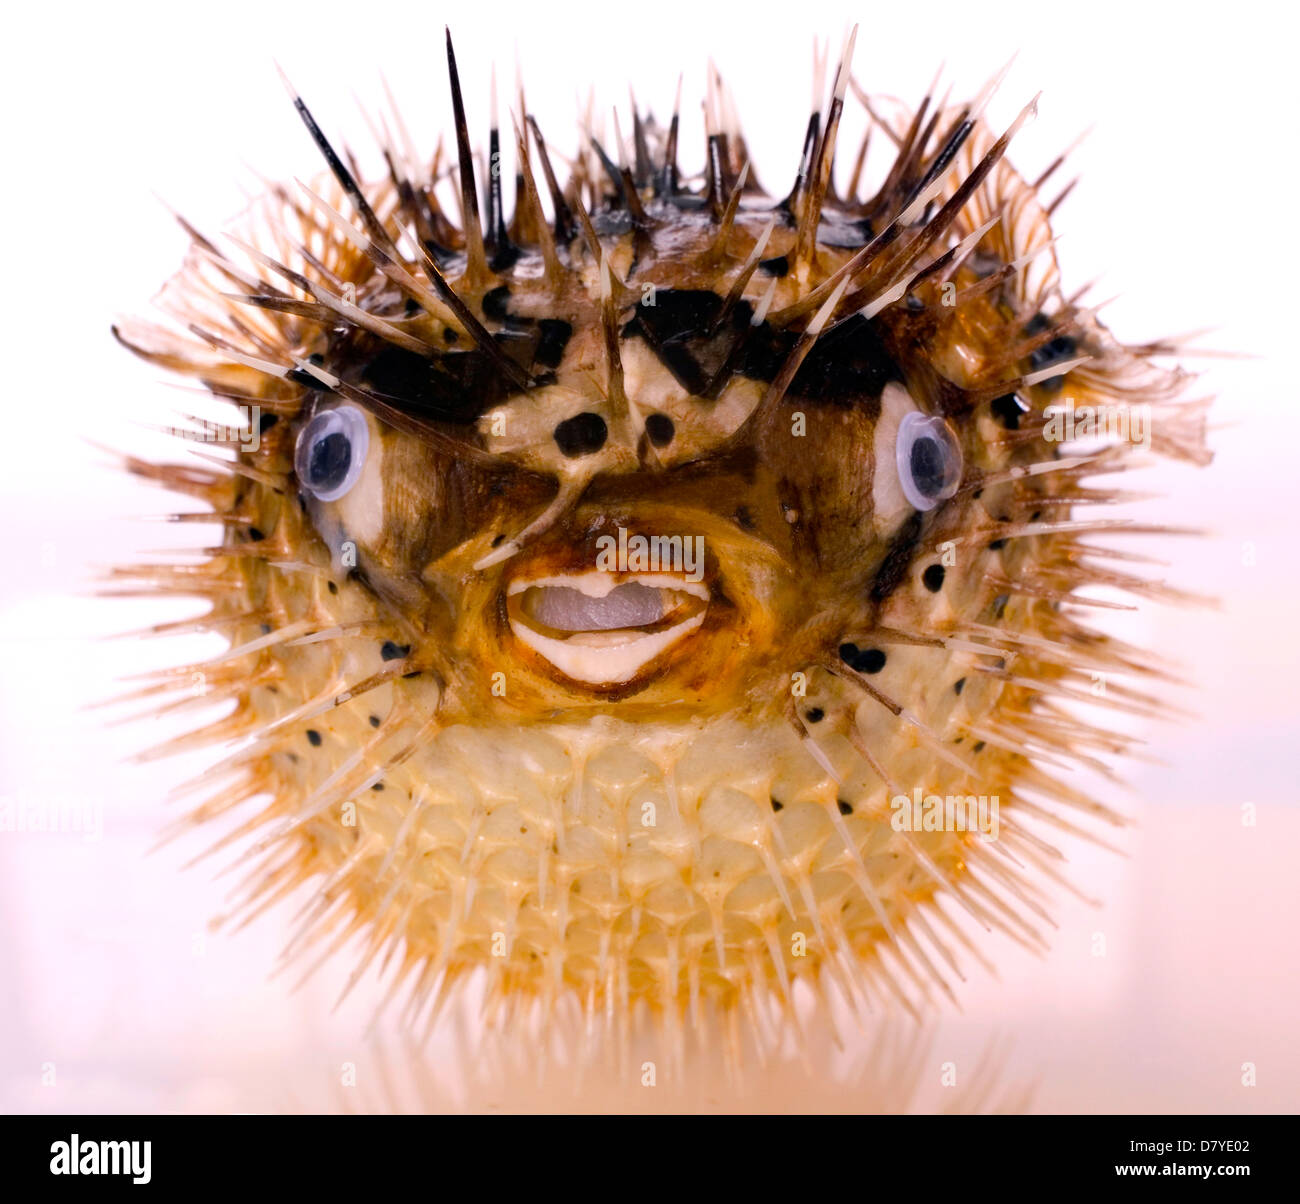 The Spiny Puffer Fish with its' anti-predatory defense mechanism of sharp spines. Stock Photo